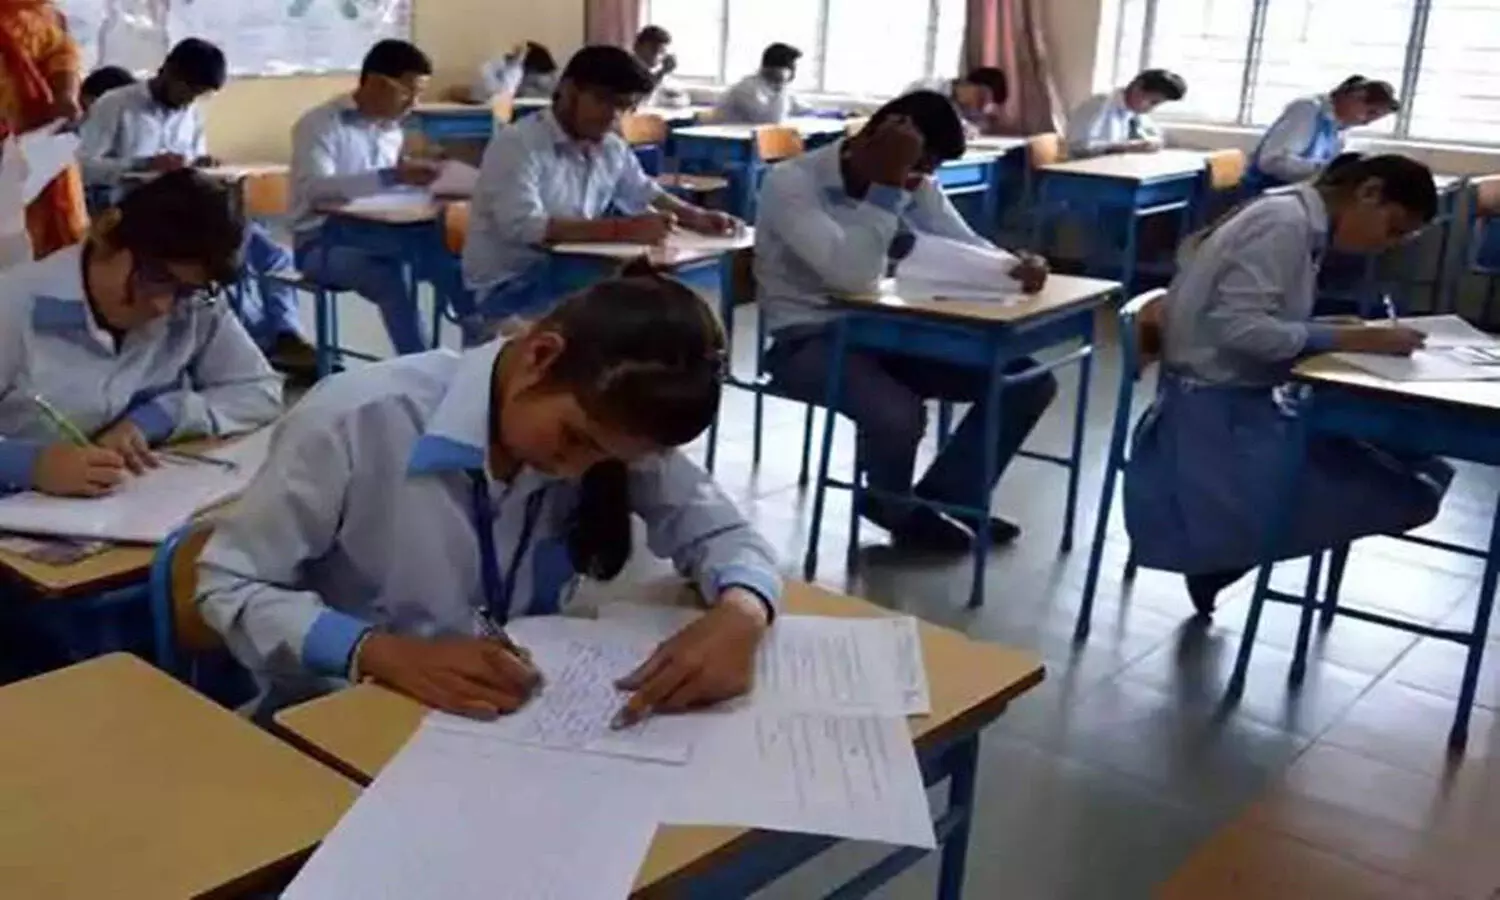 UP Board Exam 2021: Uttar Pradesh govt cancels class 12 state board exams. Details here